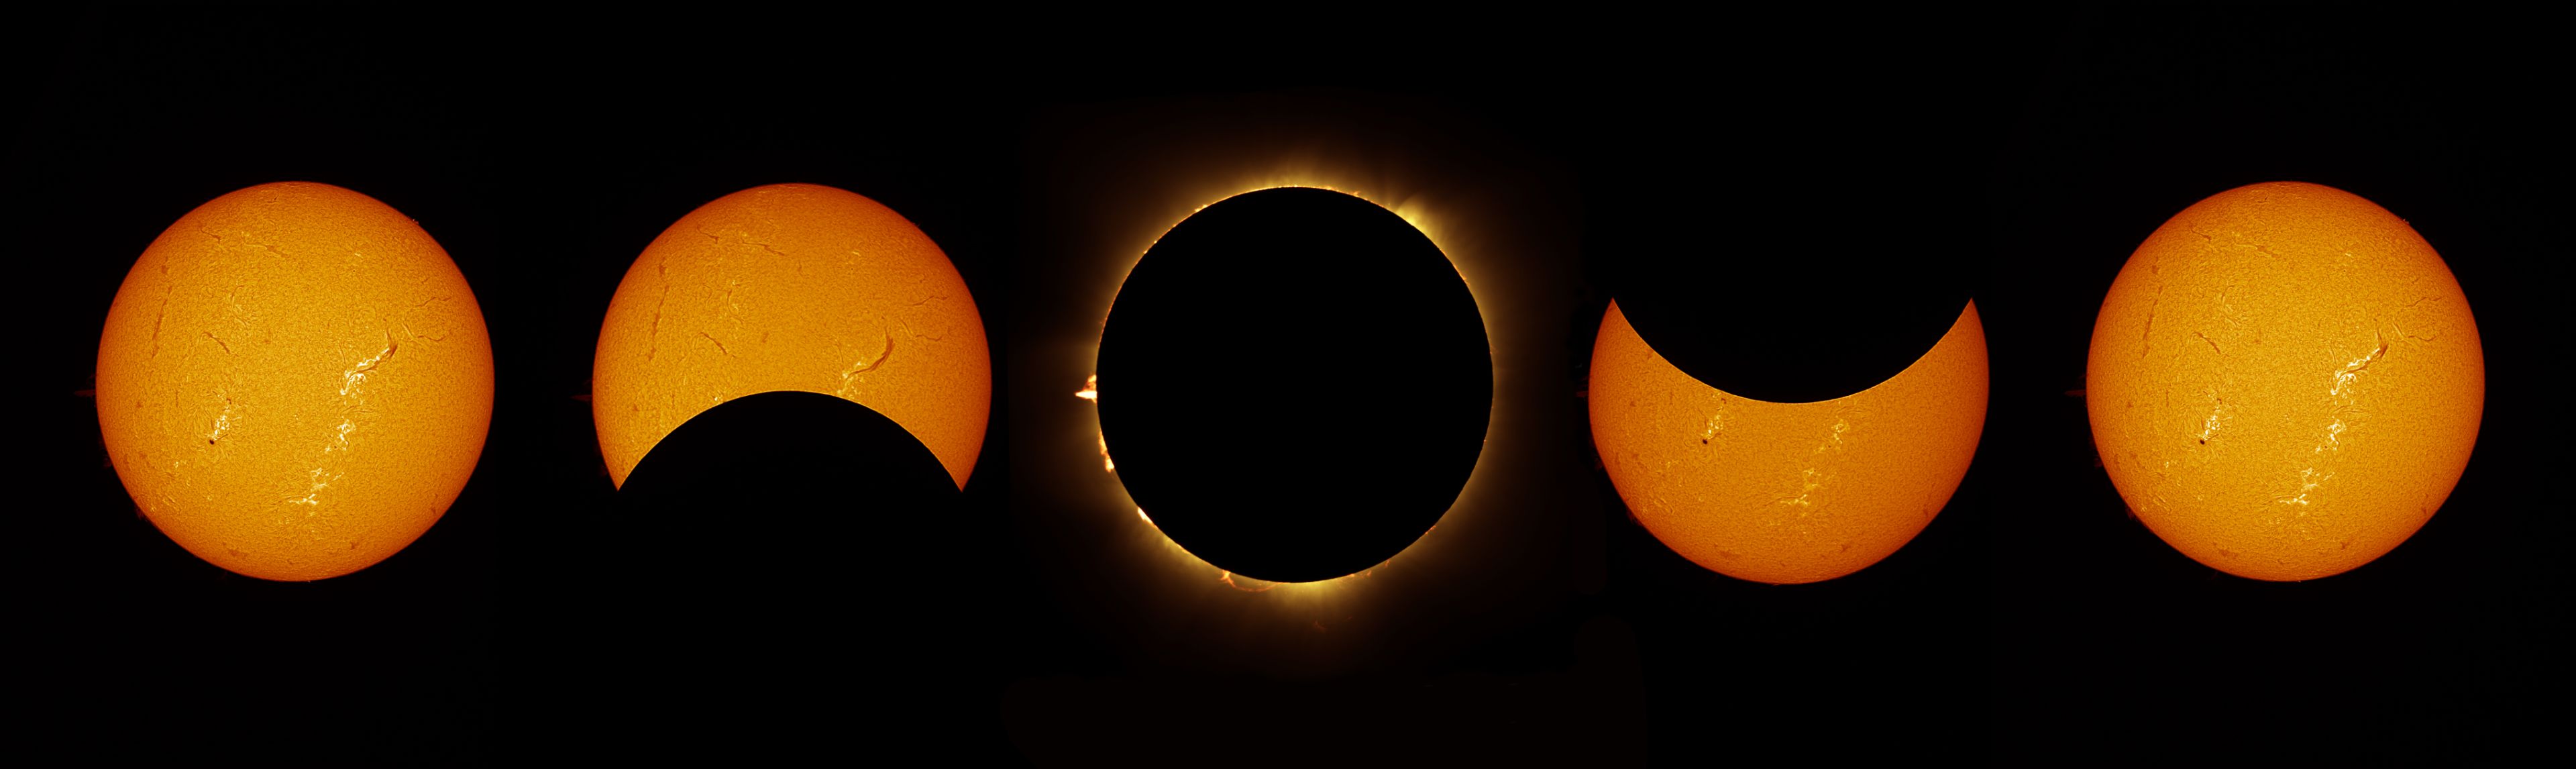 five images of the moon's progression across the sun